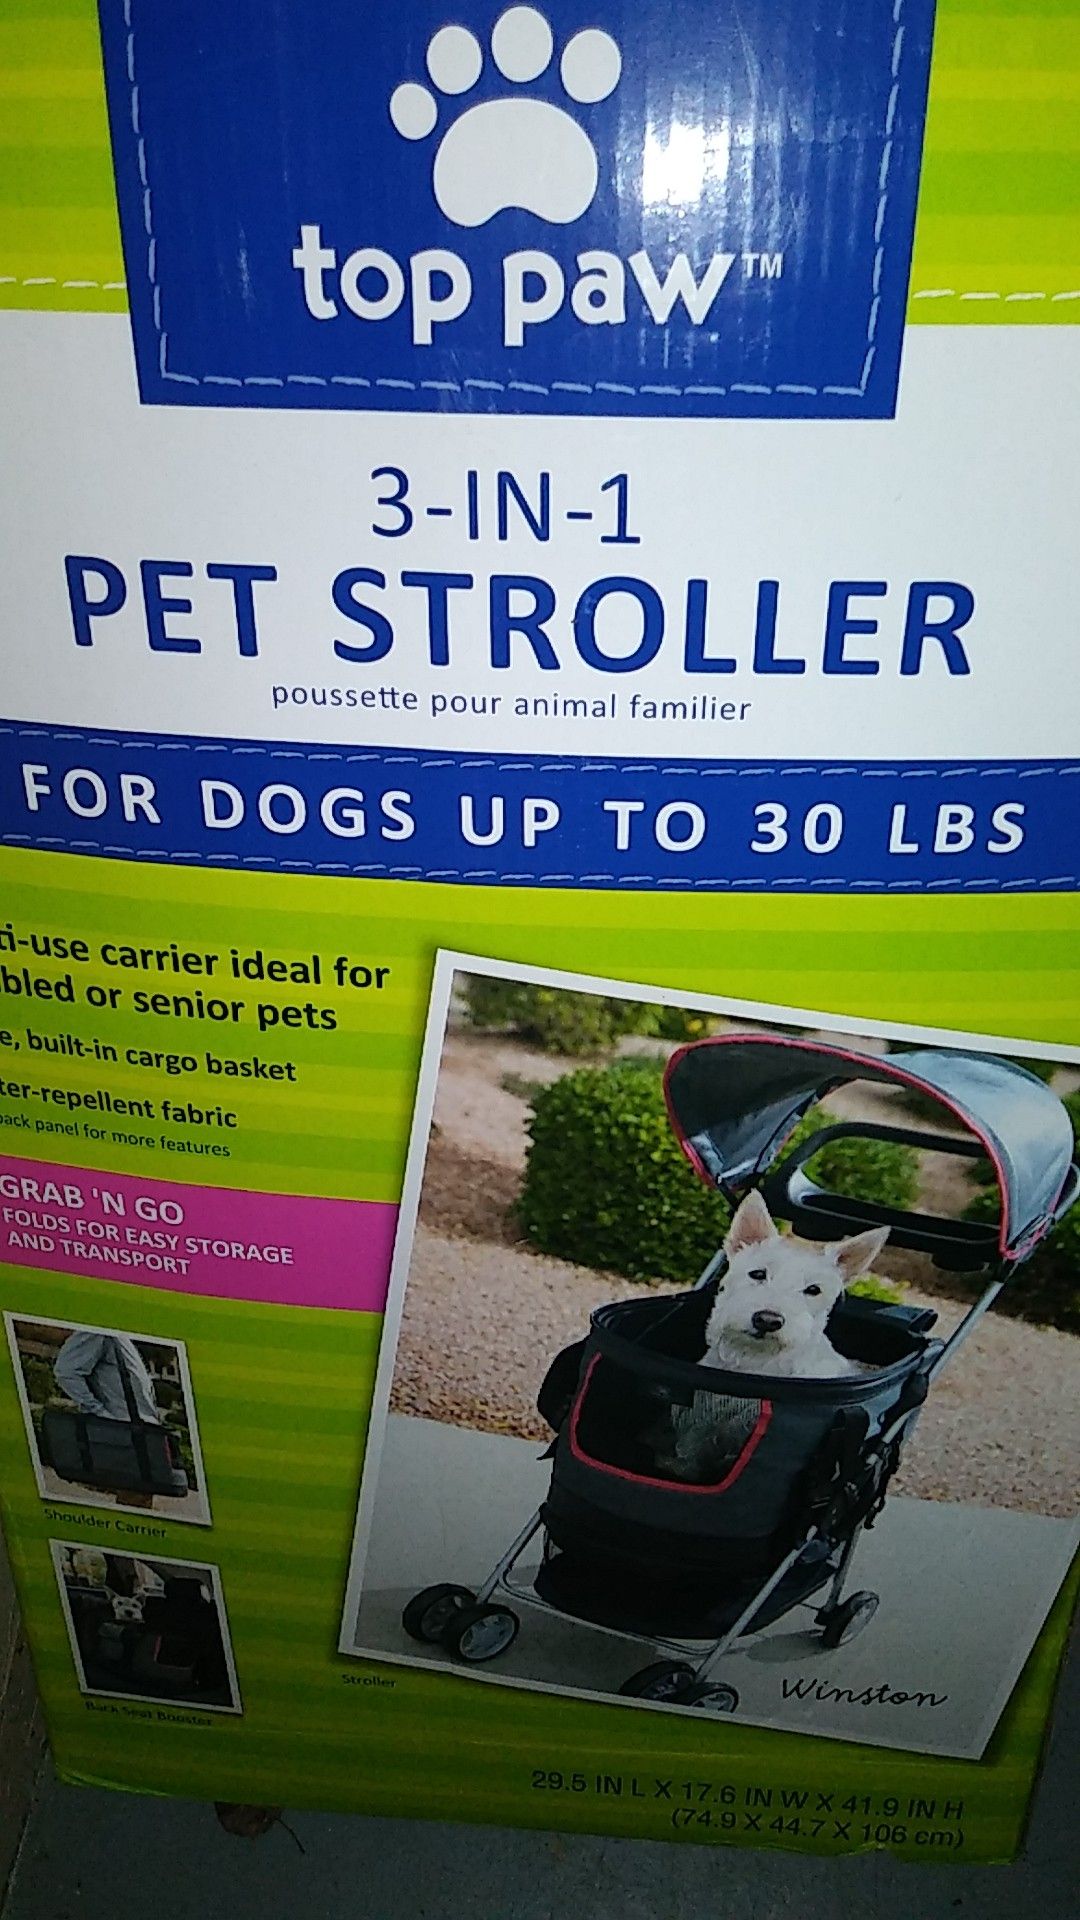 Pet stroller two in one